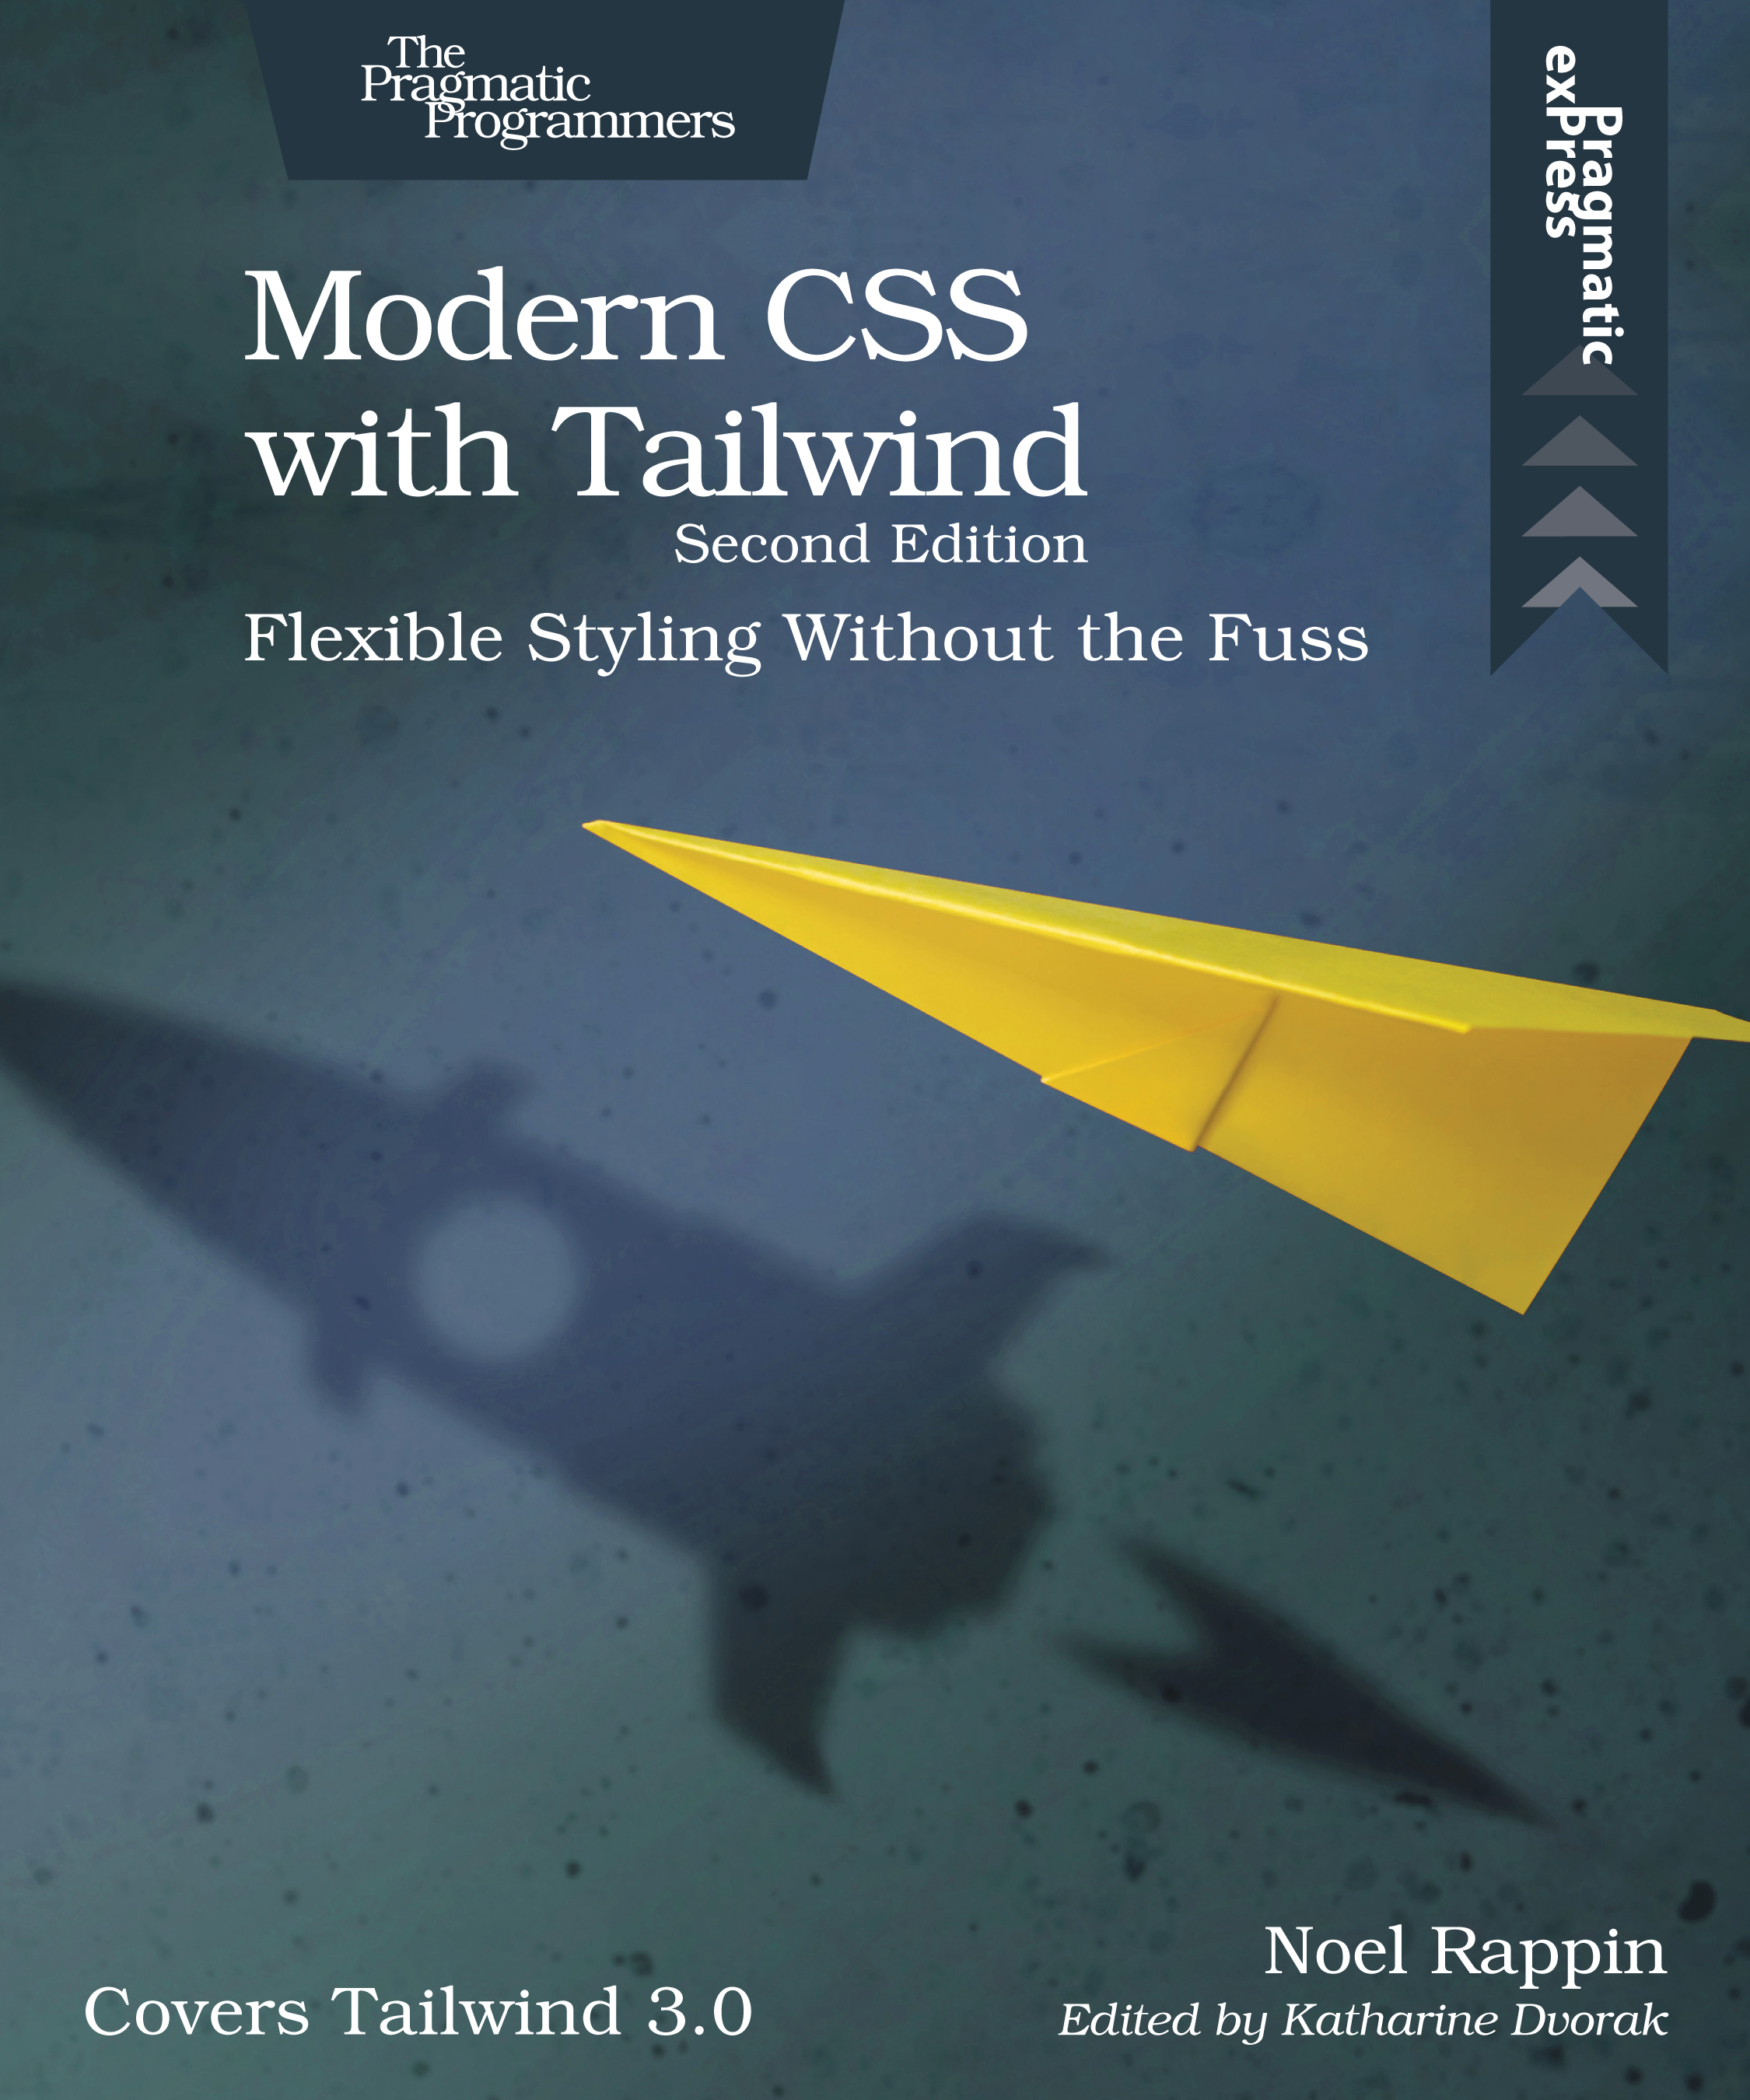 Modern CSS with Tailwind, Second Edition: Flexible Styling Without the Fuss  by Noel Rappin